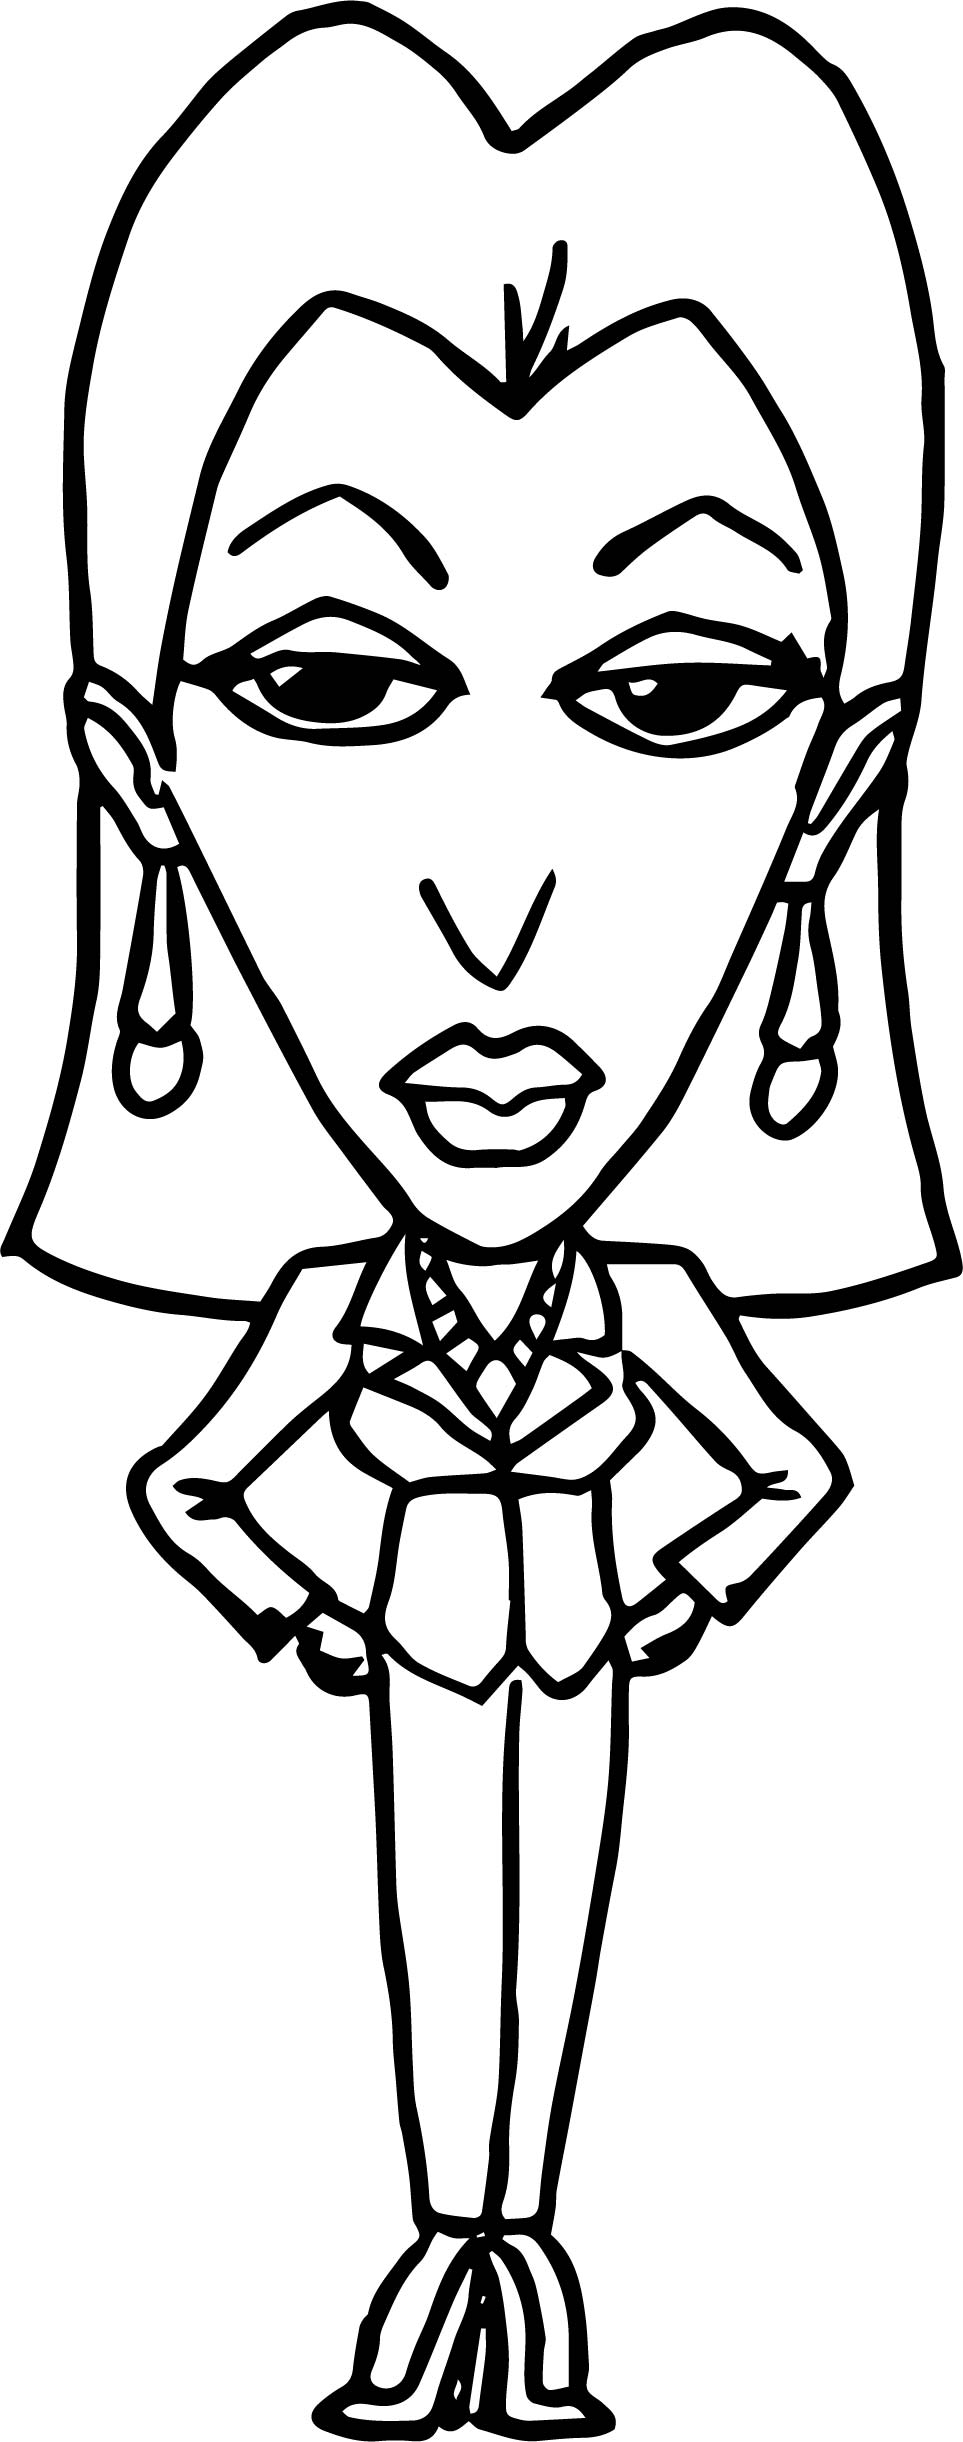 Characters Woman Big Head Coloring Page - Wecoloringpage.com